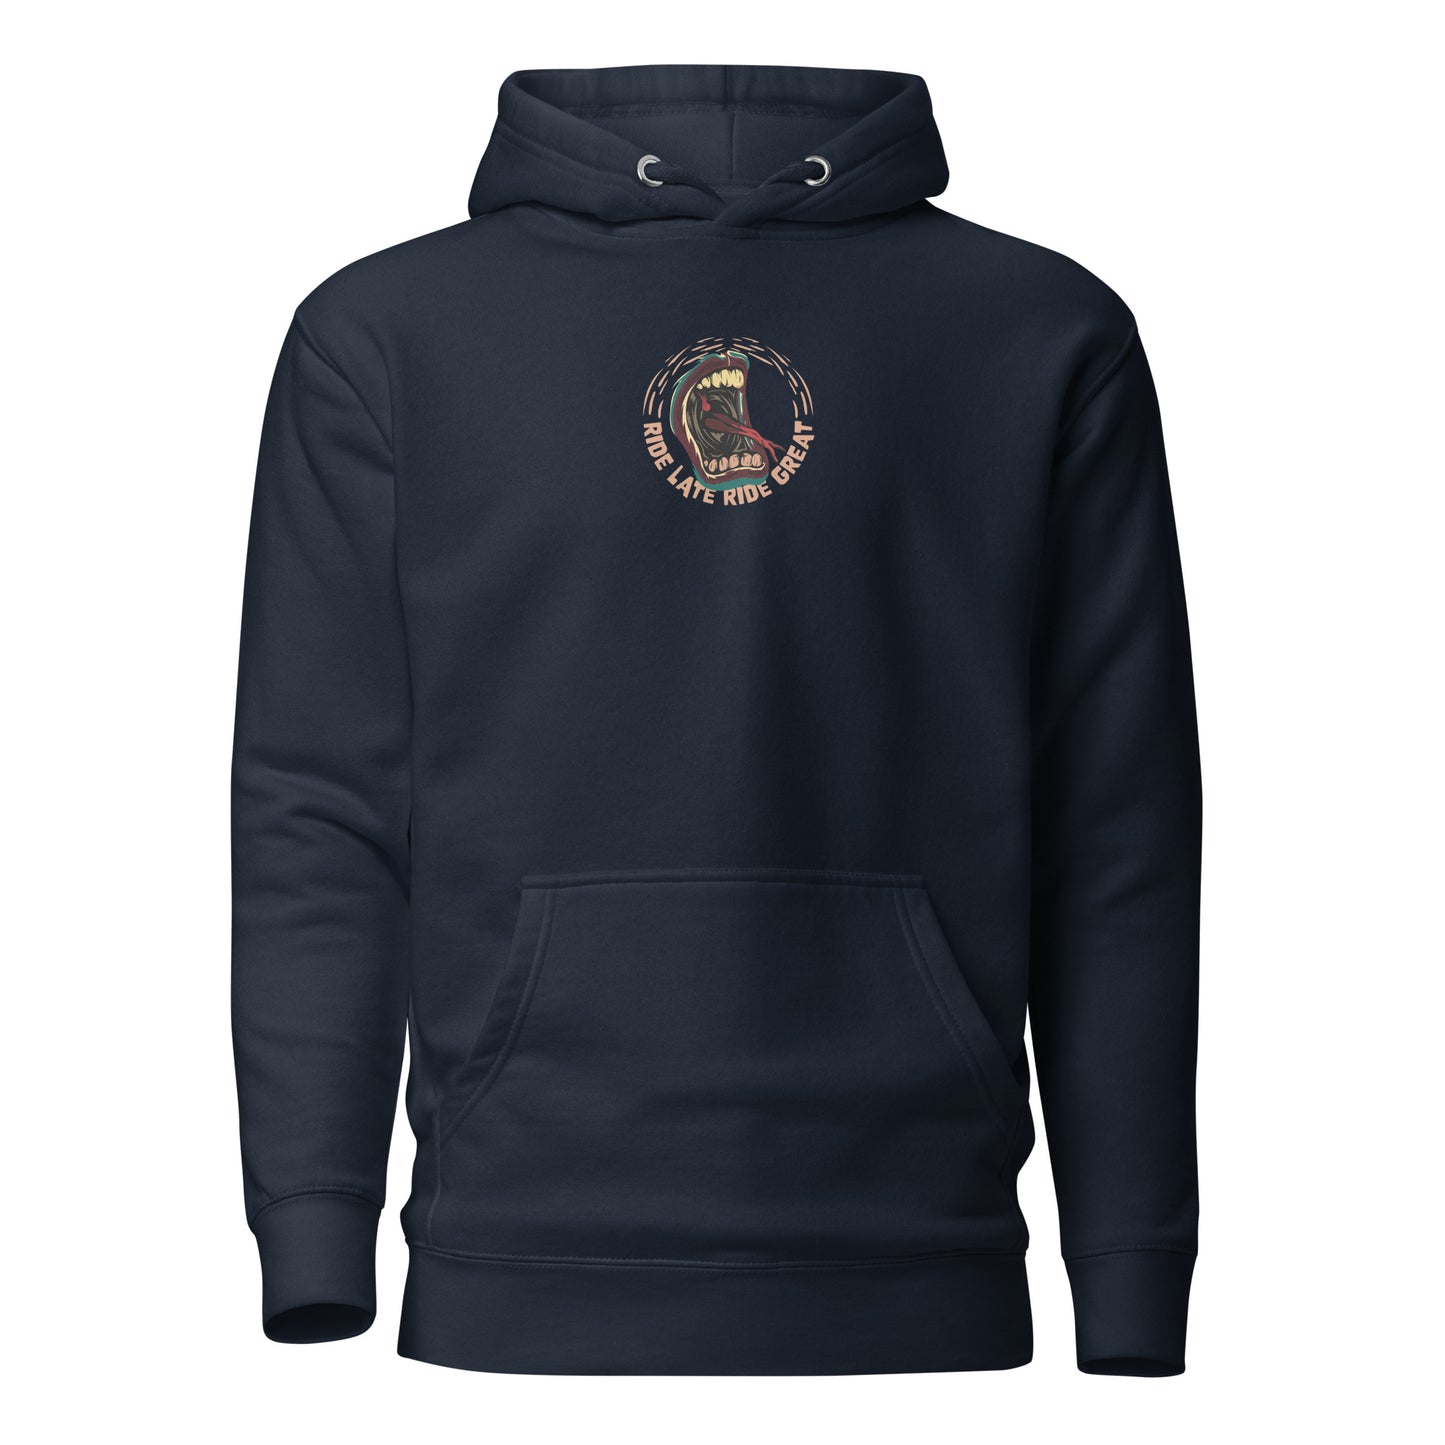 Hoodie navy face unisex Ride Late Live Great design bouche hurle style santa cruz surfing